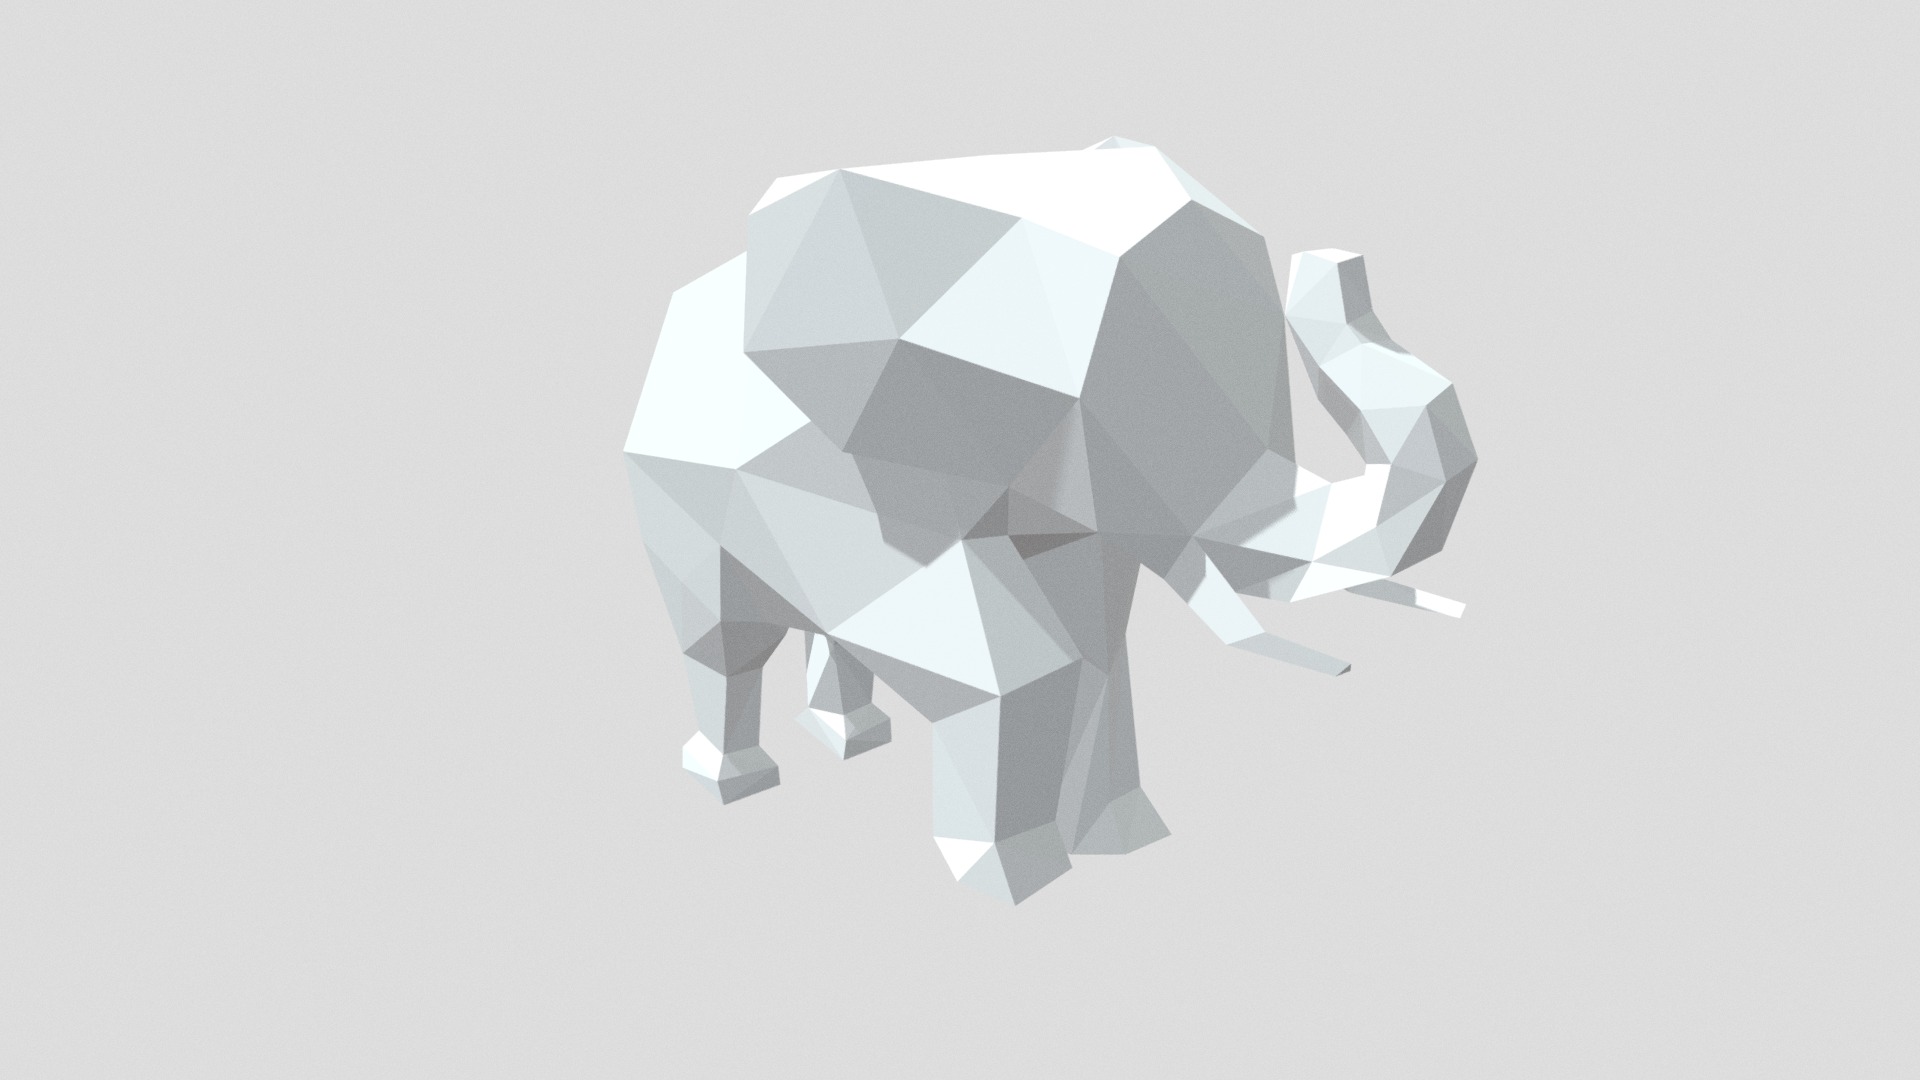 3D model Low-Poly Elephant - This is a 3D model of the Low-Poly Elephant. The 3D model is about a paper cut out of a star.